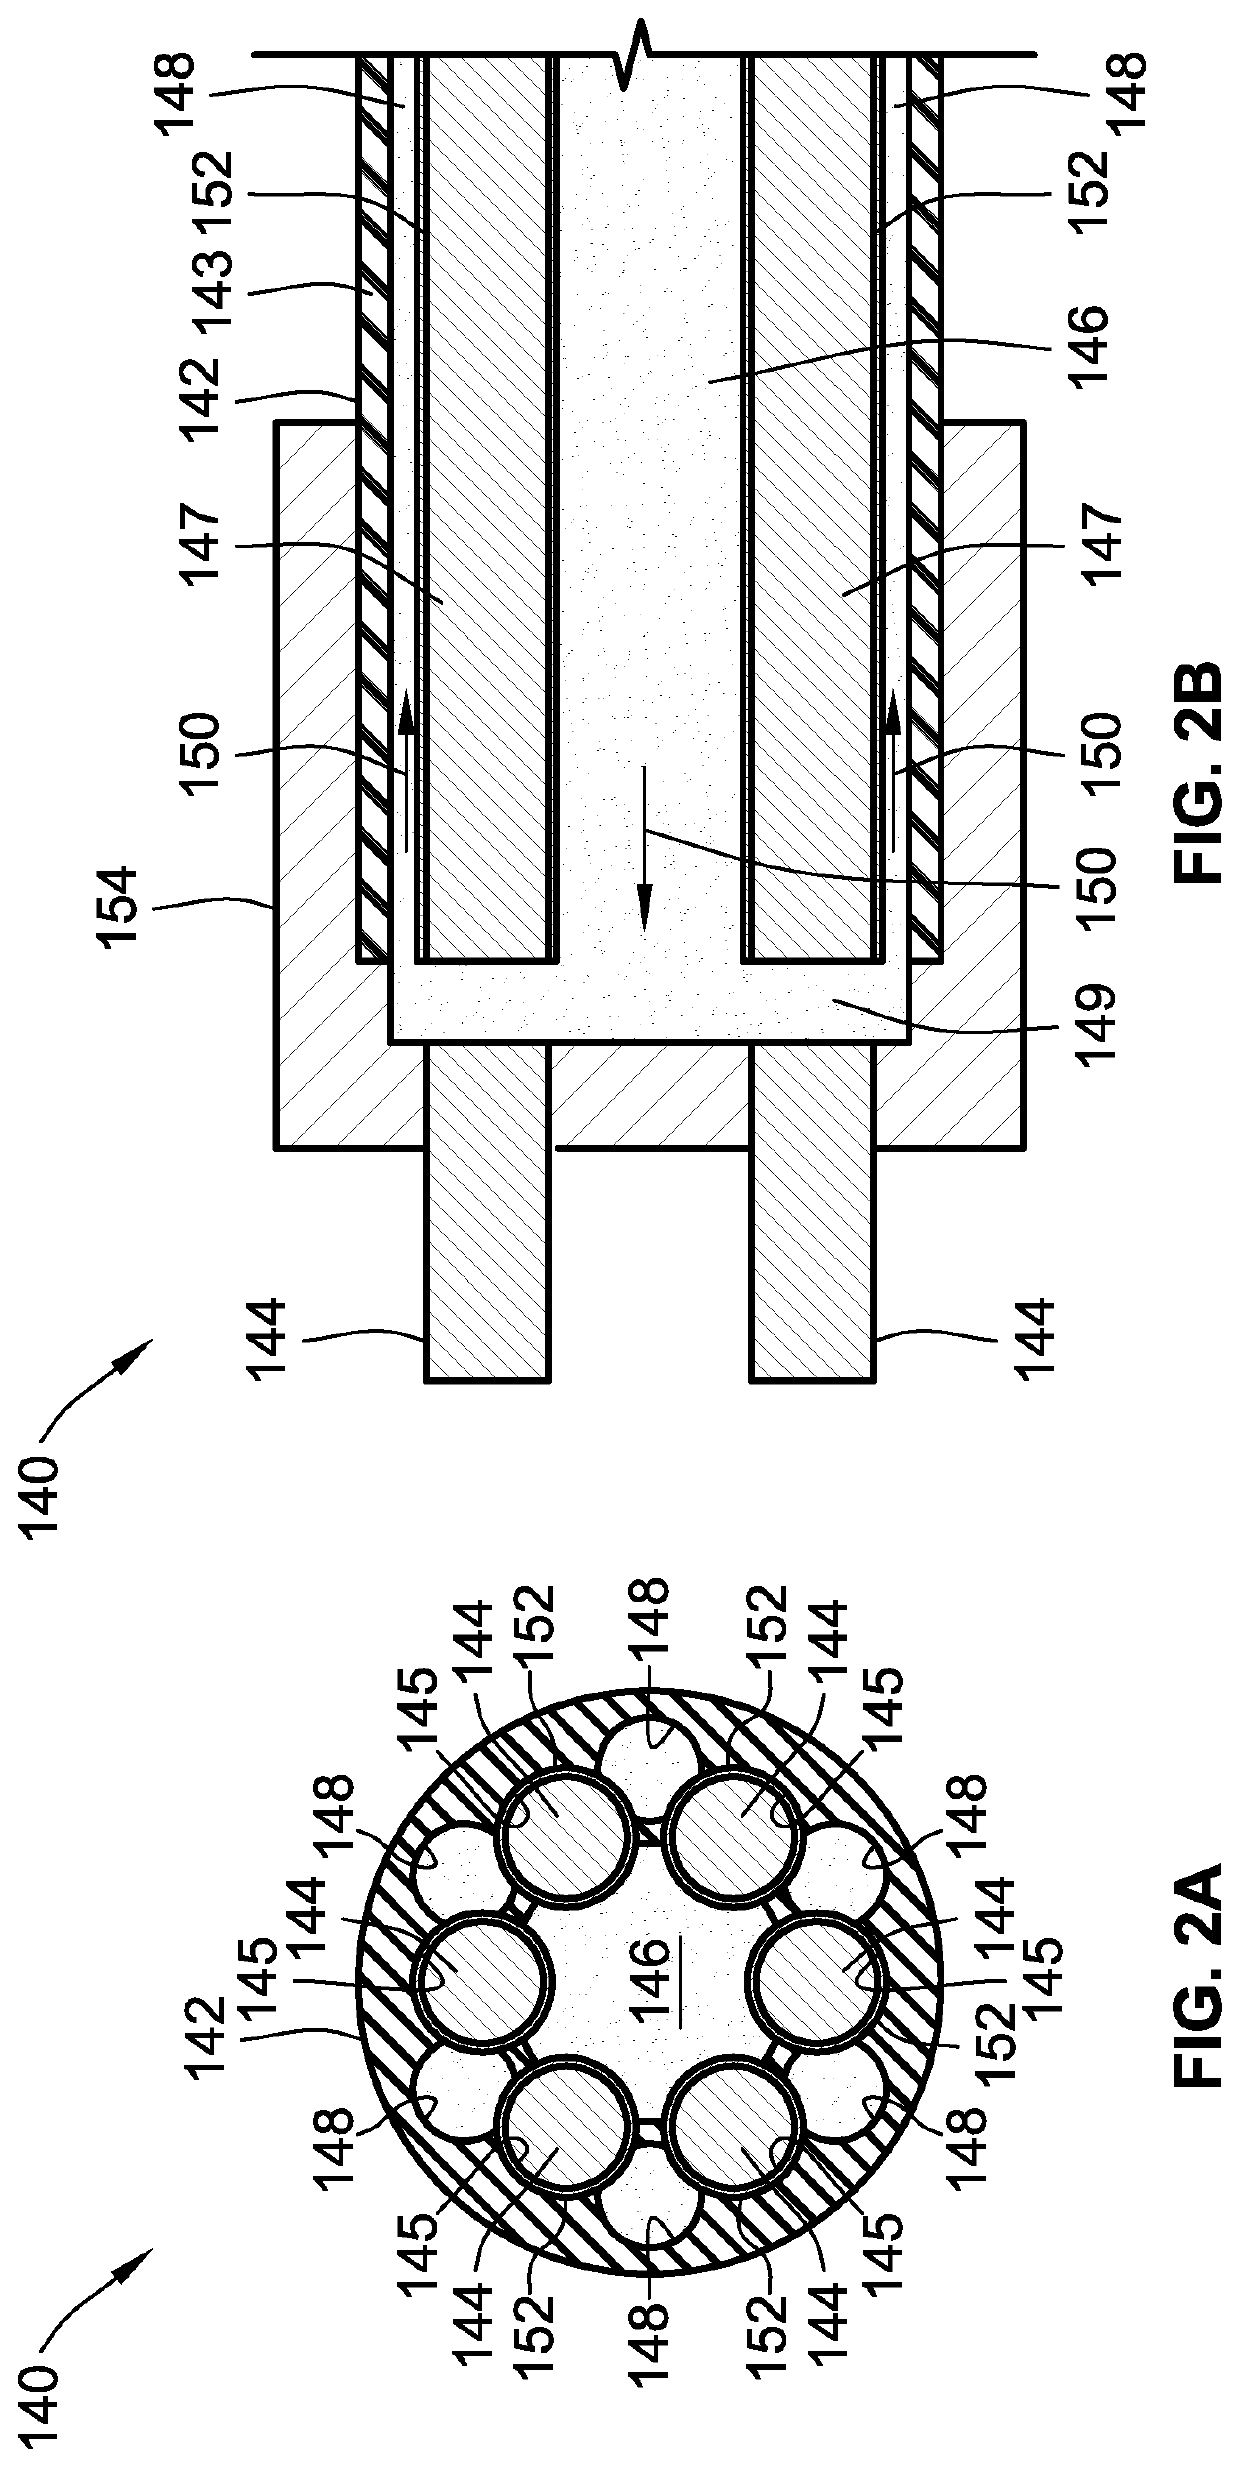 Vascular cooling system for electrical conductors